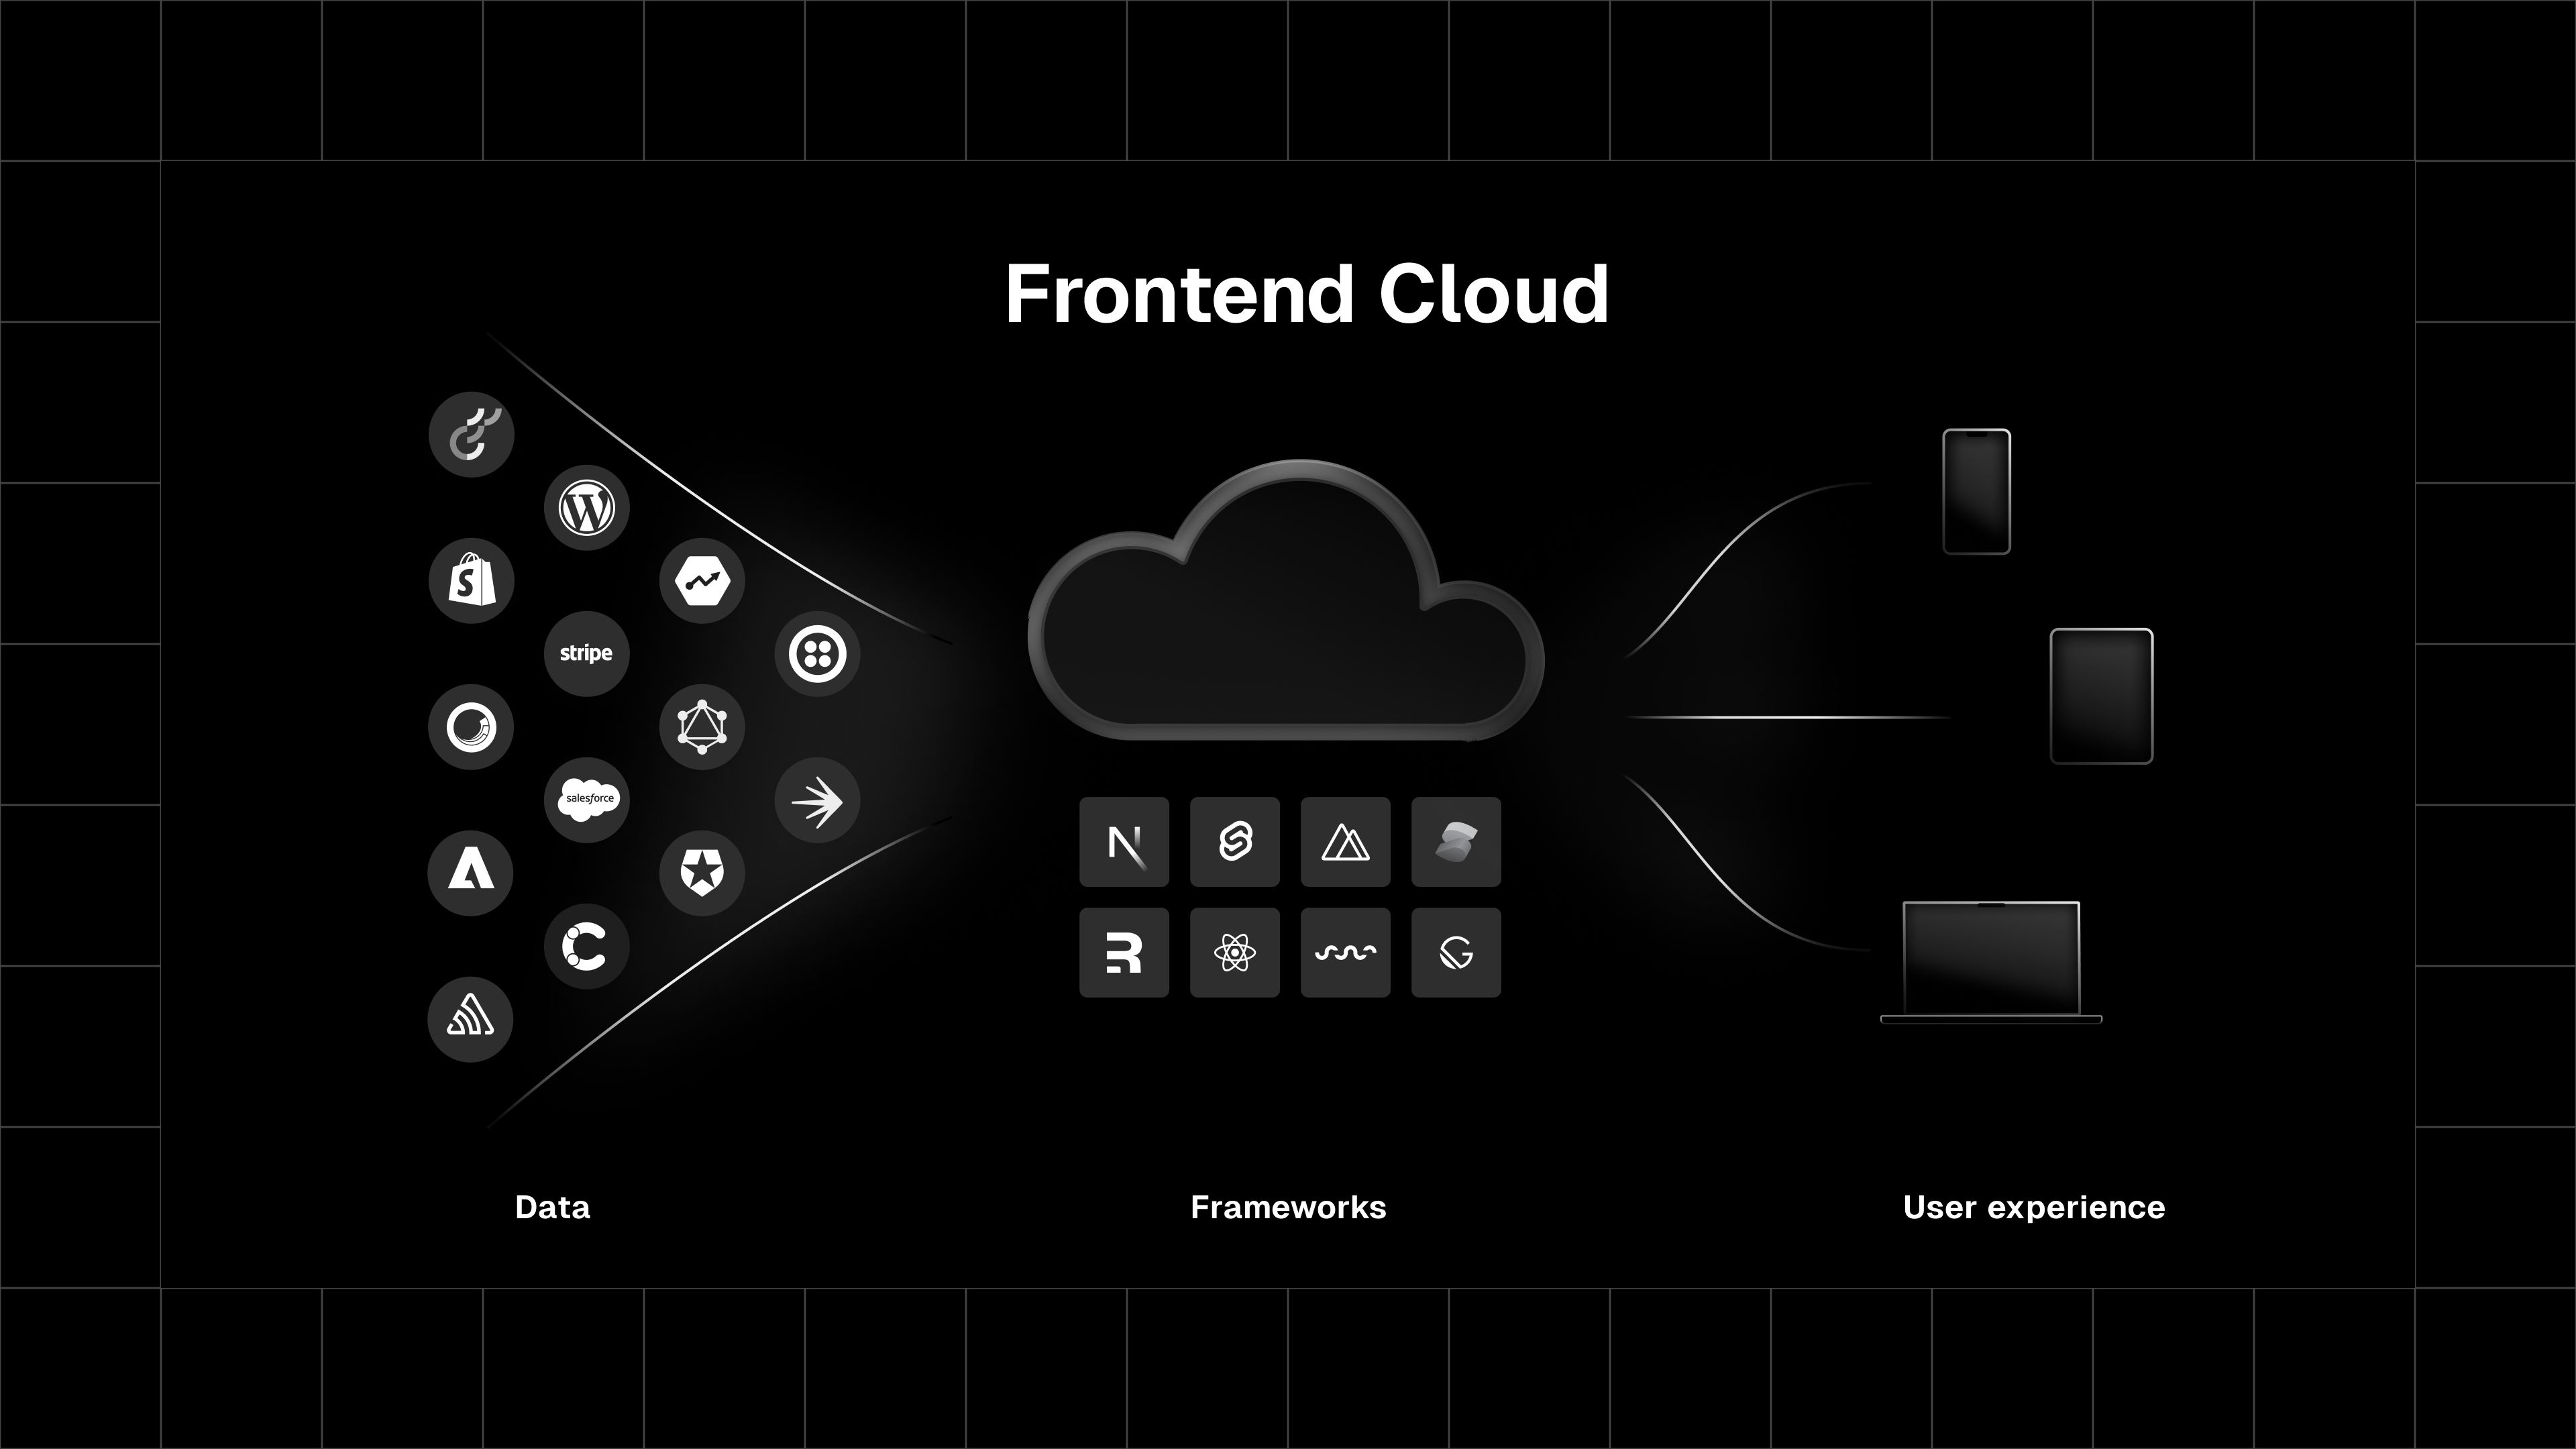 Bring your favorite framework and full-stack tools. We'll wire it all together with our Frontend Cloud.